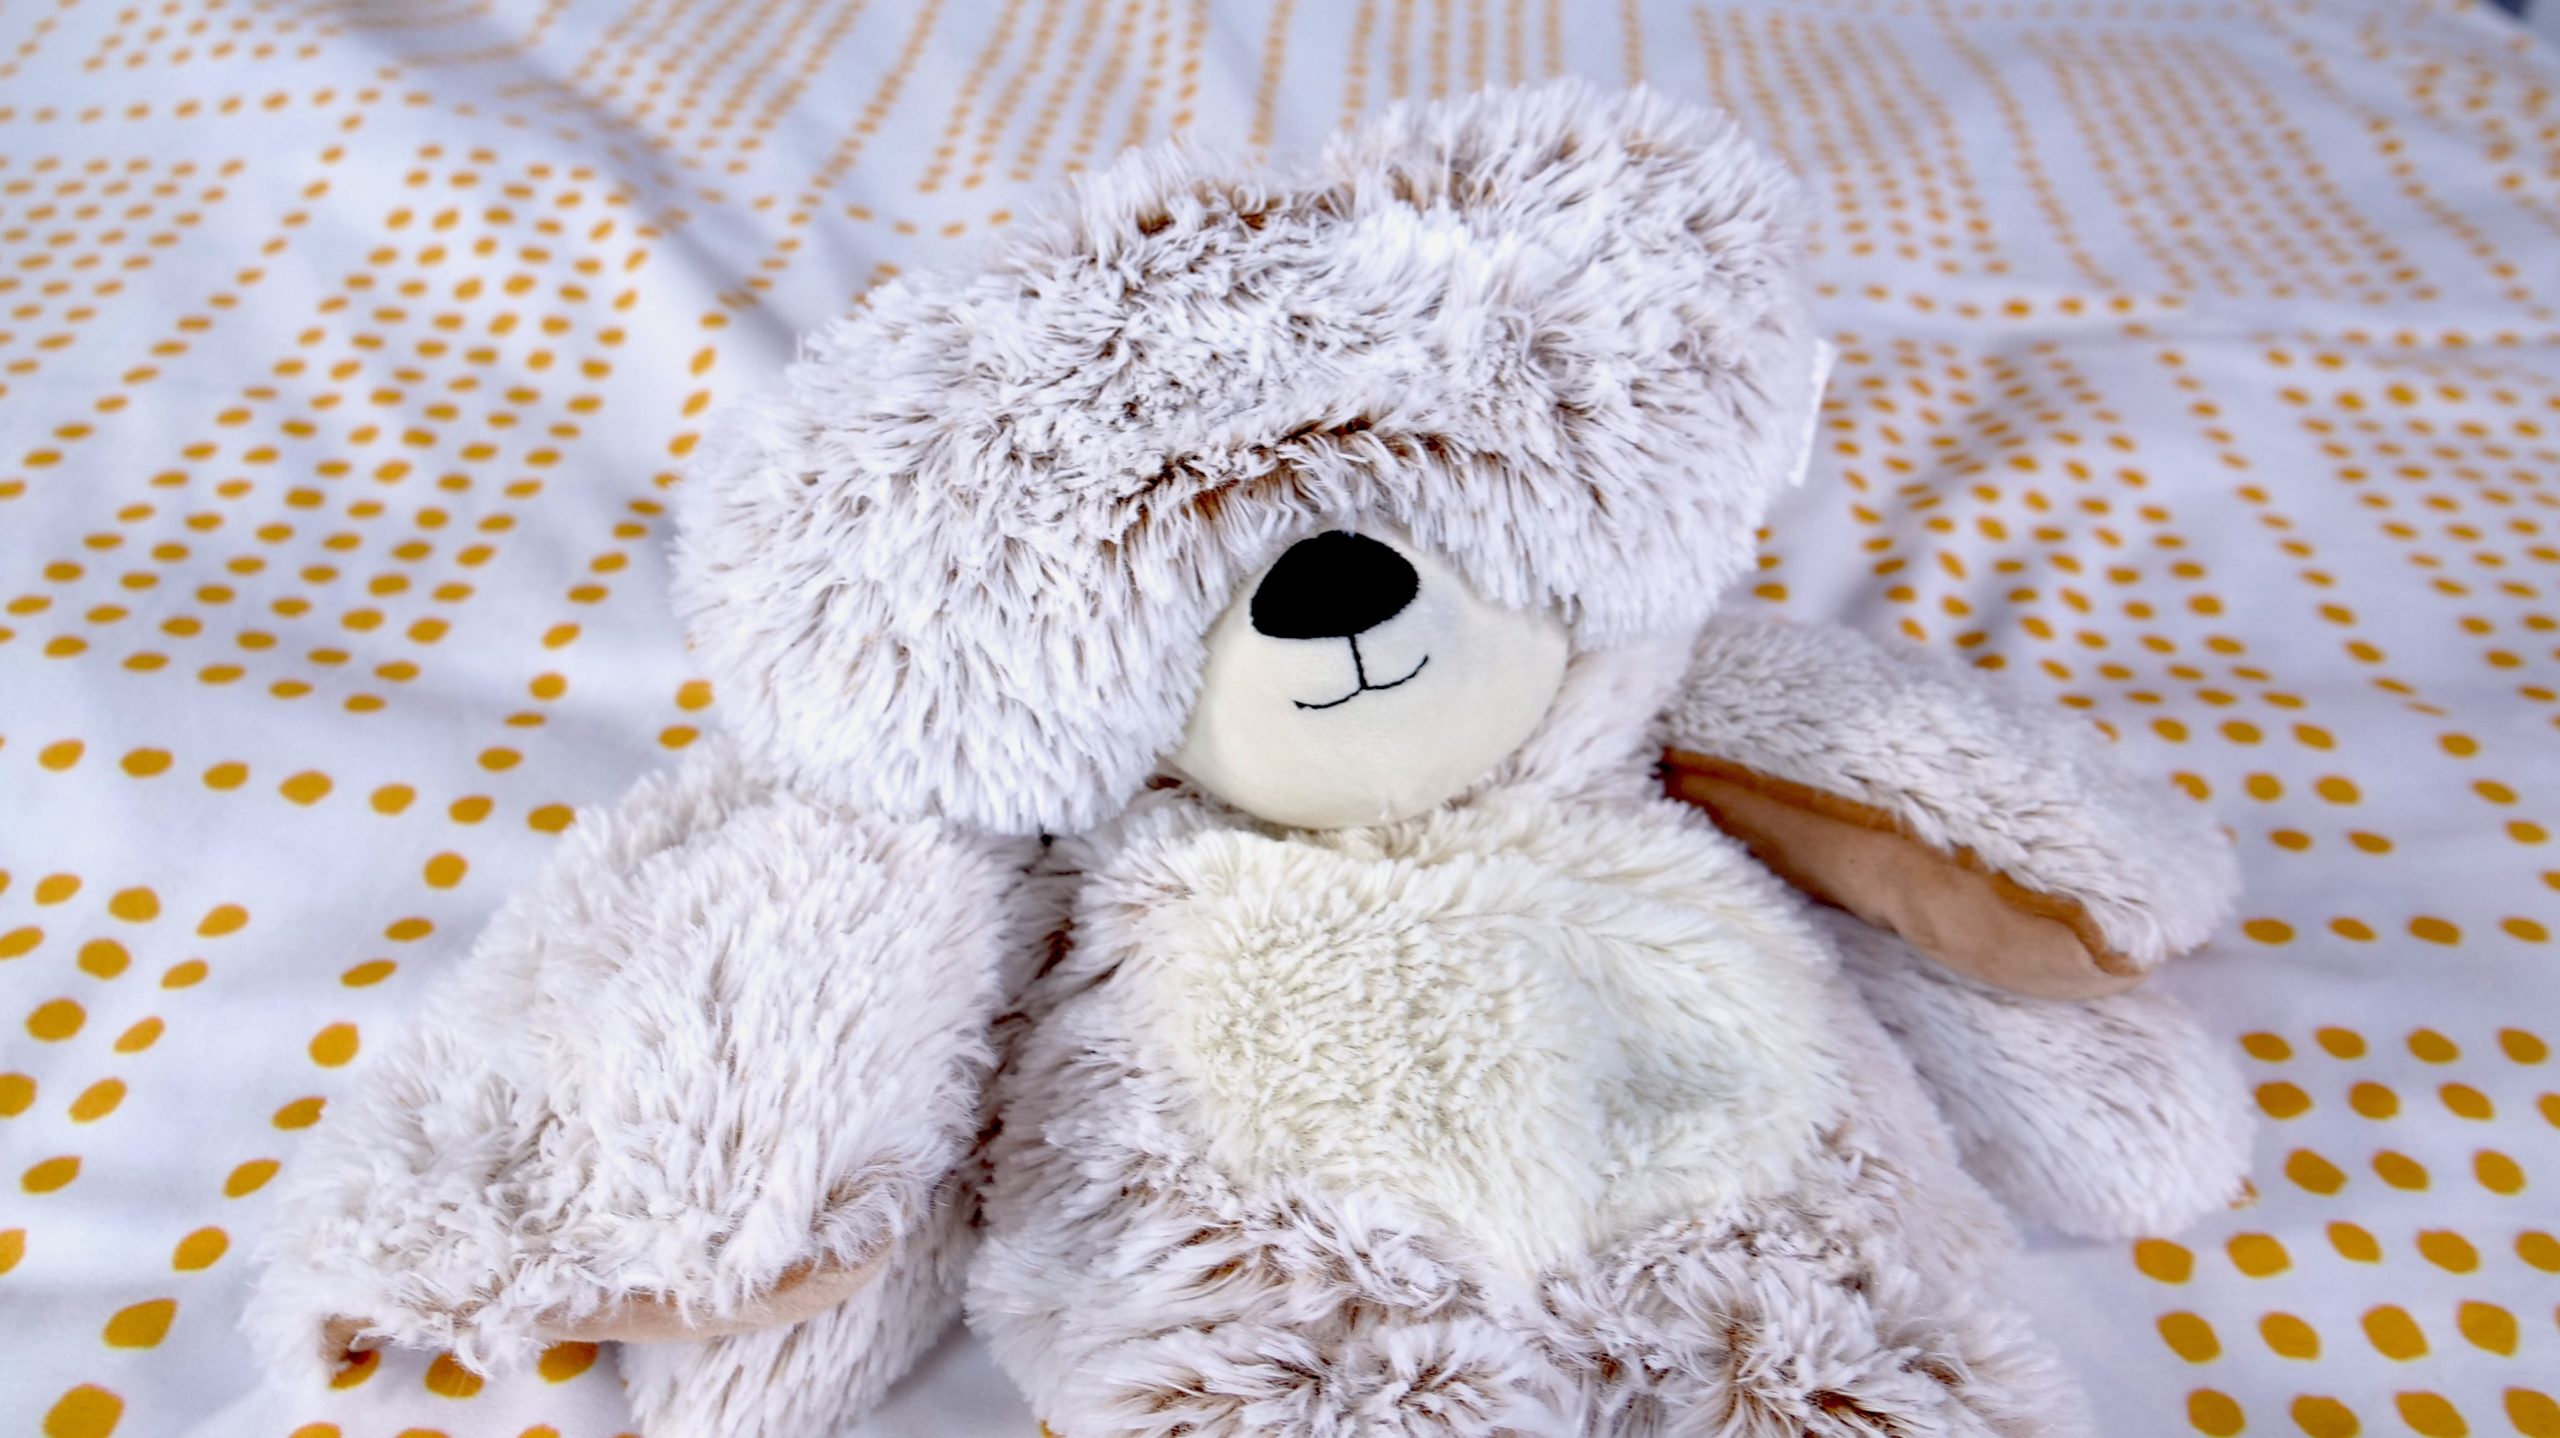 Microwavable Weighted Stuffed Animal - Soothe Anxiety with